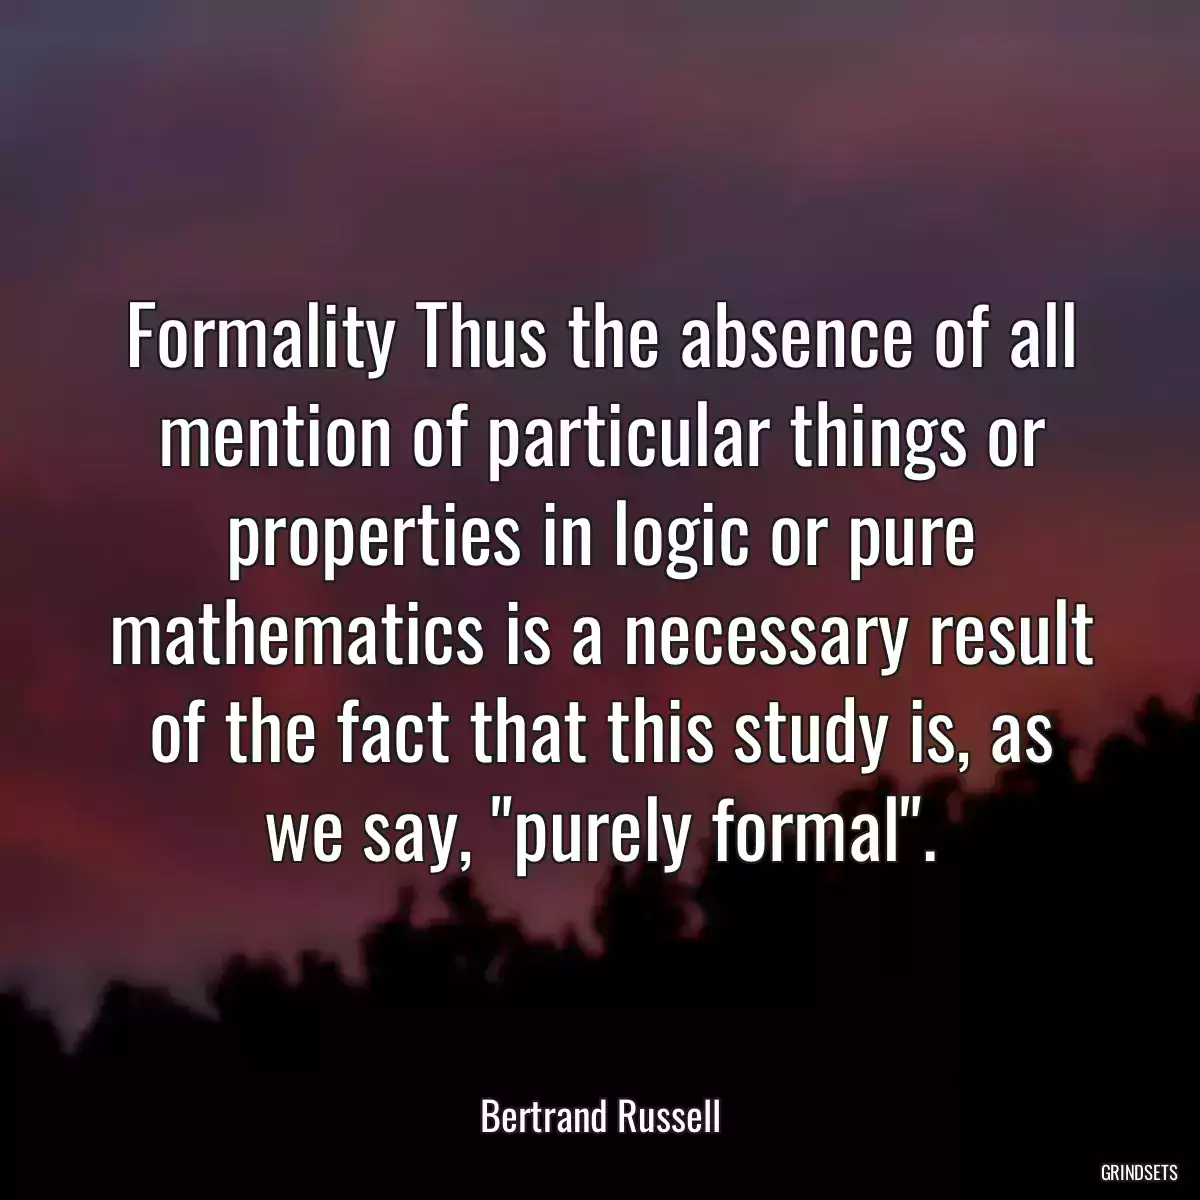 Formality Thus the absence of all mention of particular things or properties in logic or pure mathematics is a necessary result of the fact that this study is, as we say, \